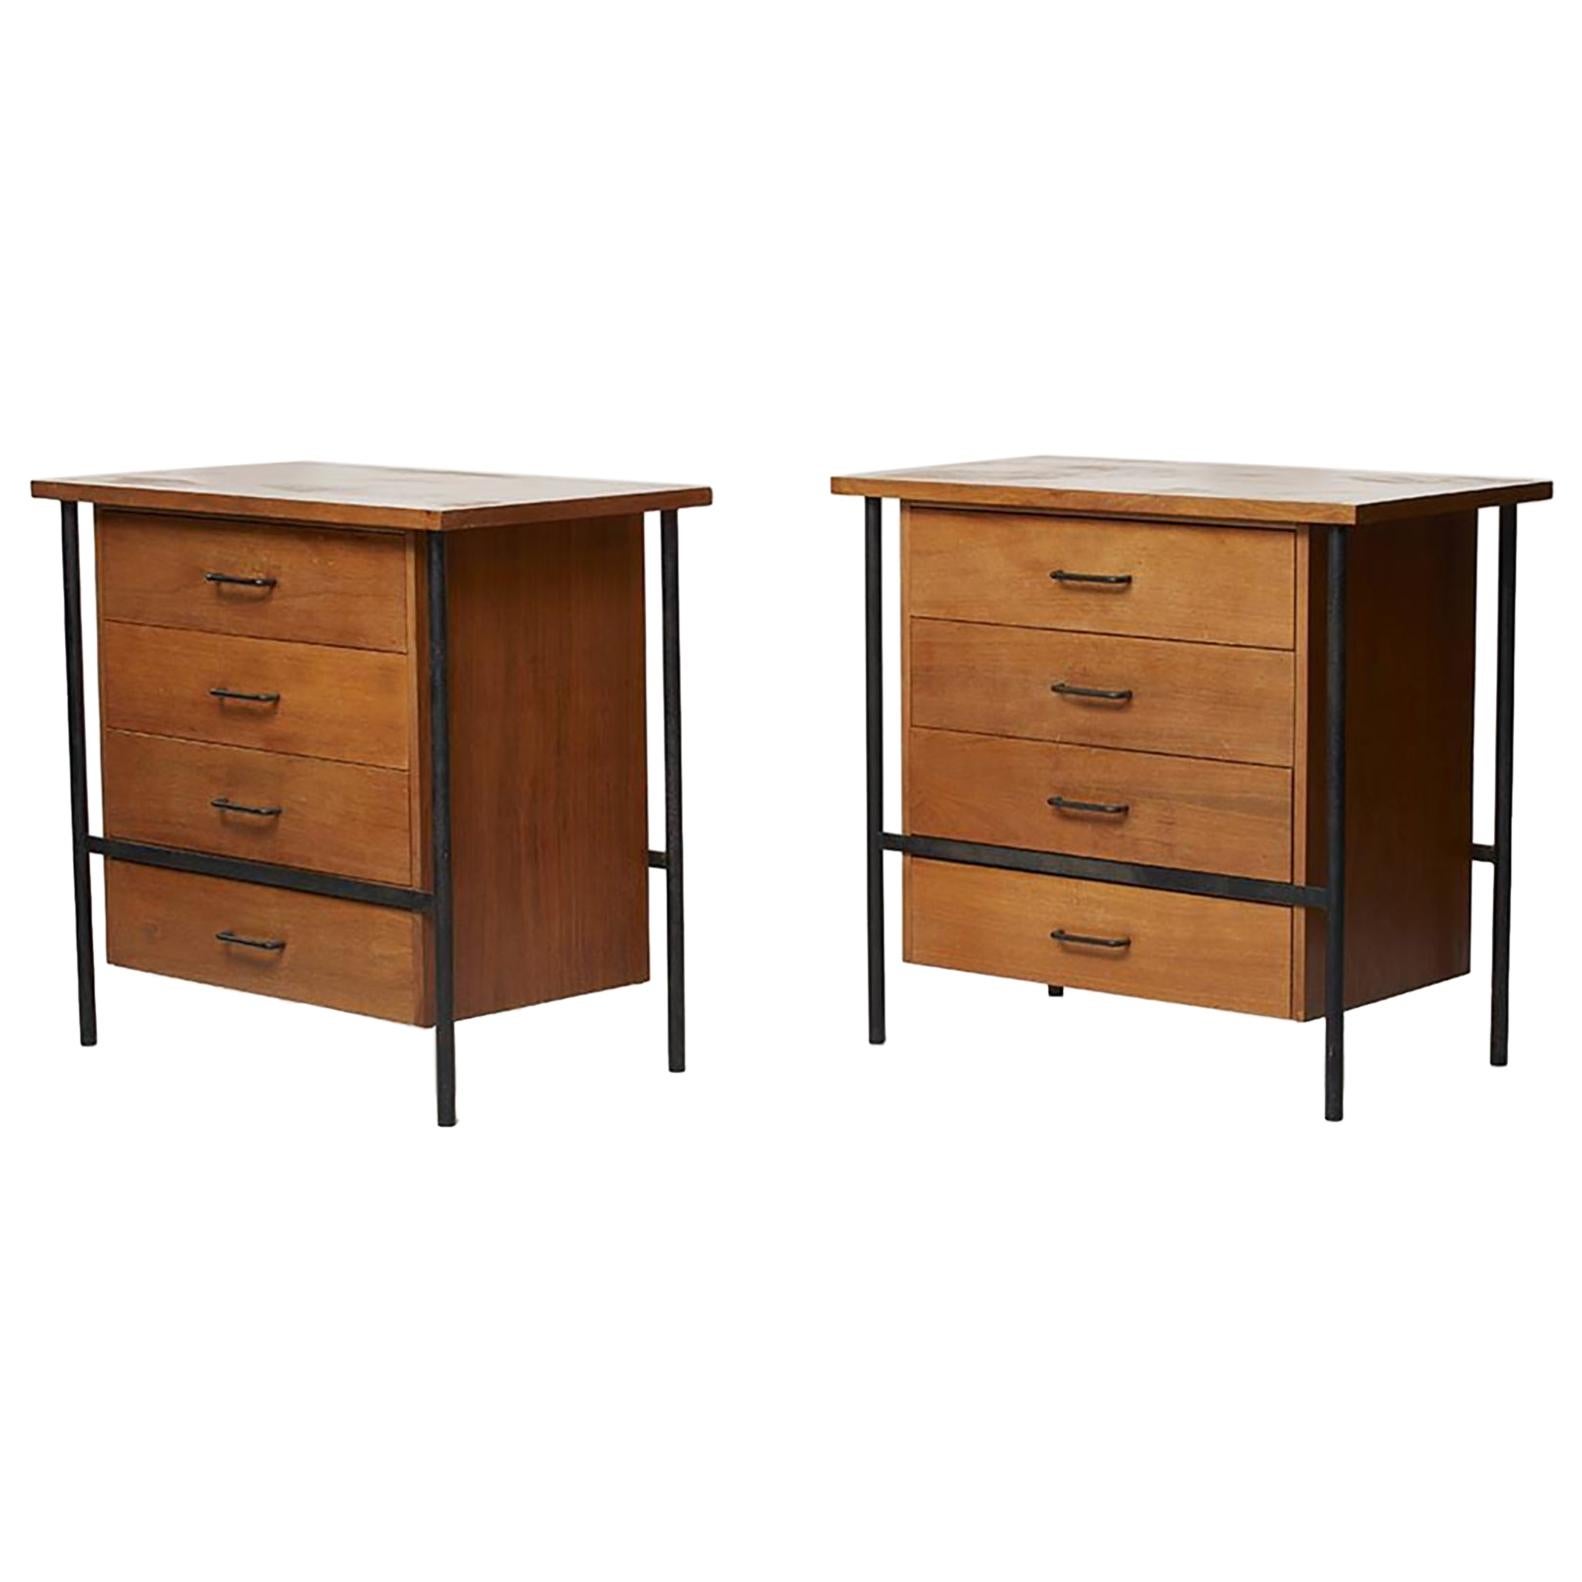 Pair of Iron and Walnut Chests Designed by Donald Knorr for Vista For Sale